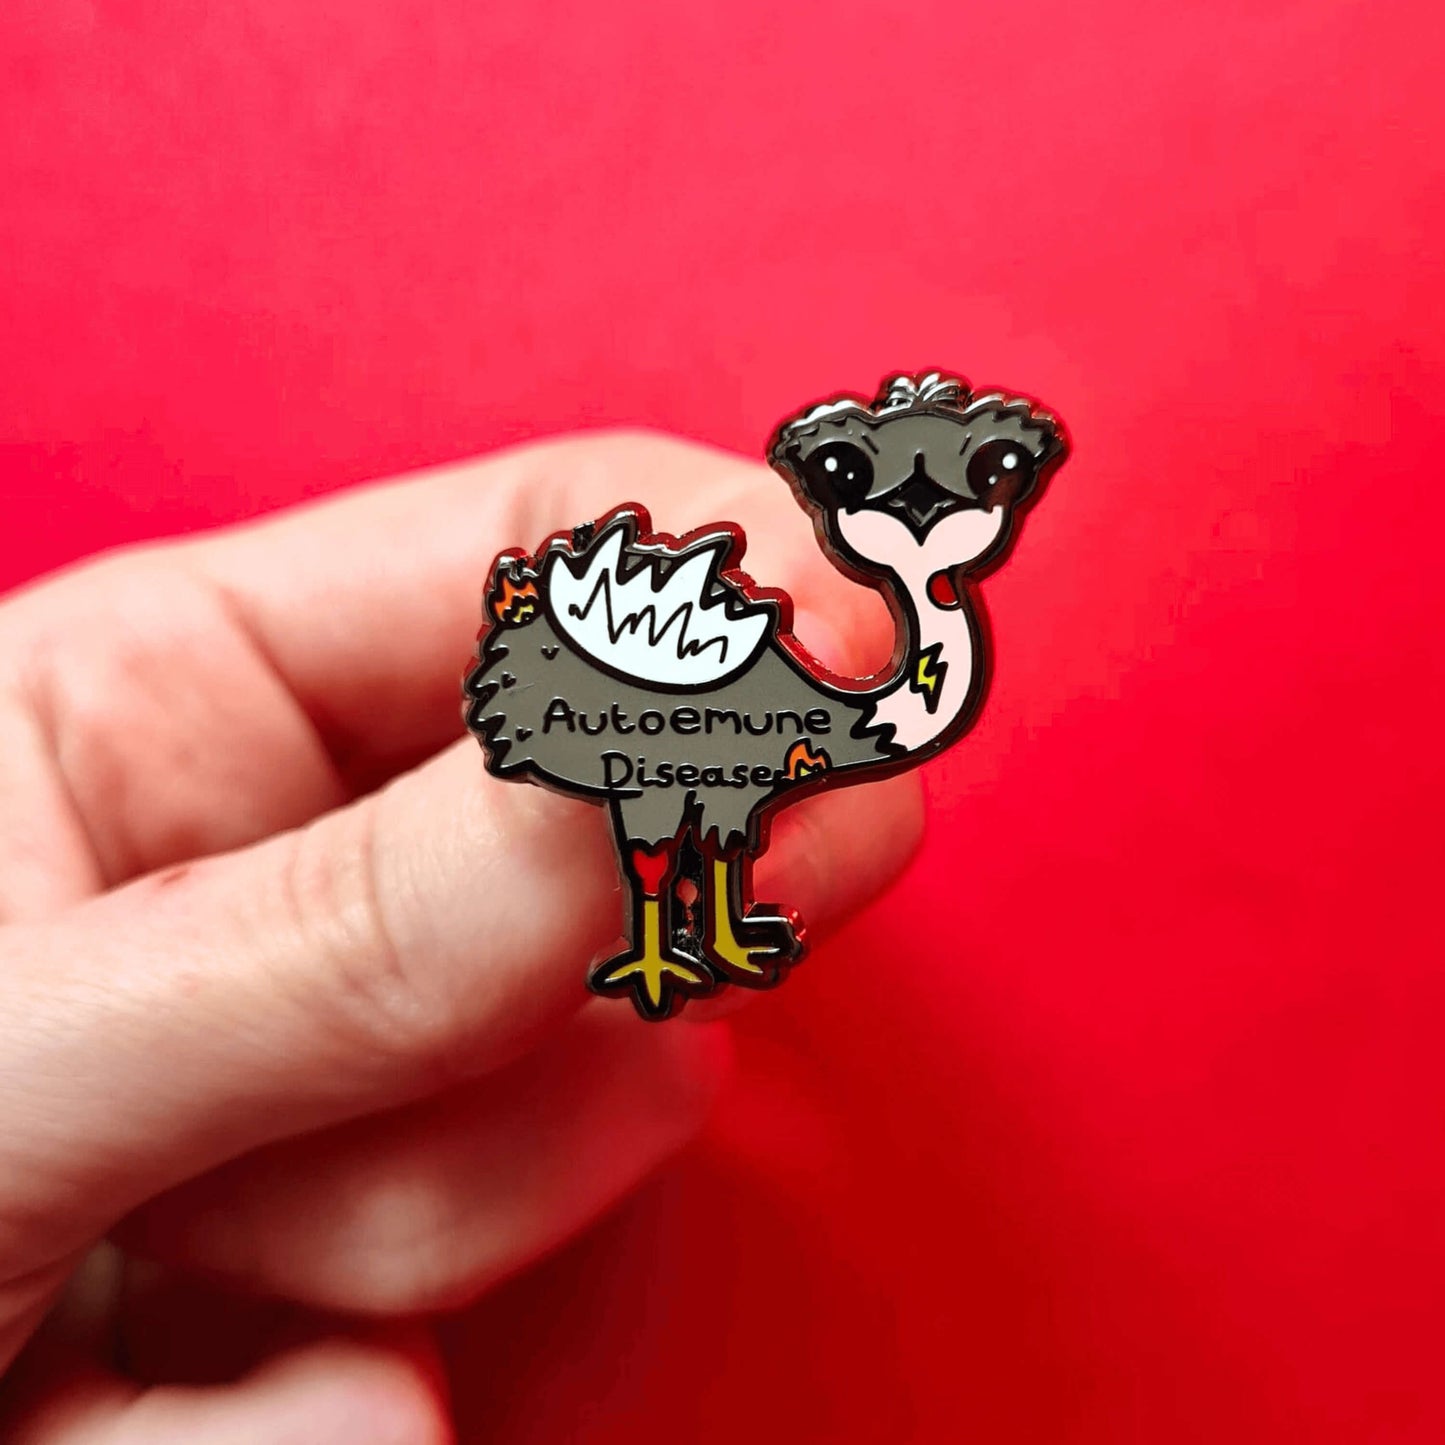 Autoemune Enamel Pin - Autoimmune Disease being held over a red background. The pin is a grey and white emu bird with various problems highlighted with lightning bolts, flames and red circles with the words autoemune disease written across its belly. Design created to raise awareness for autoimmune diseases.